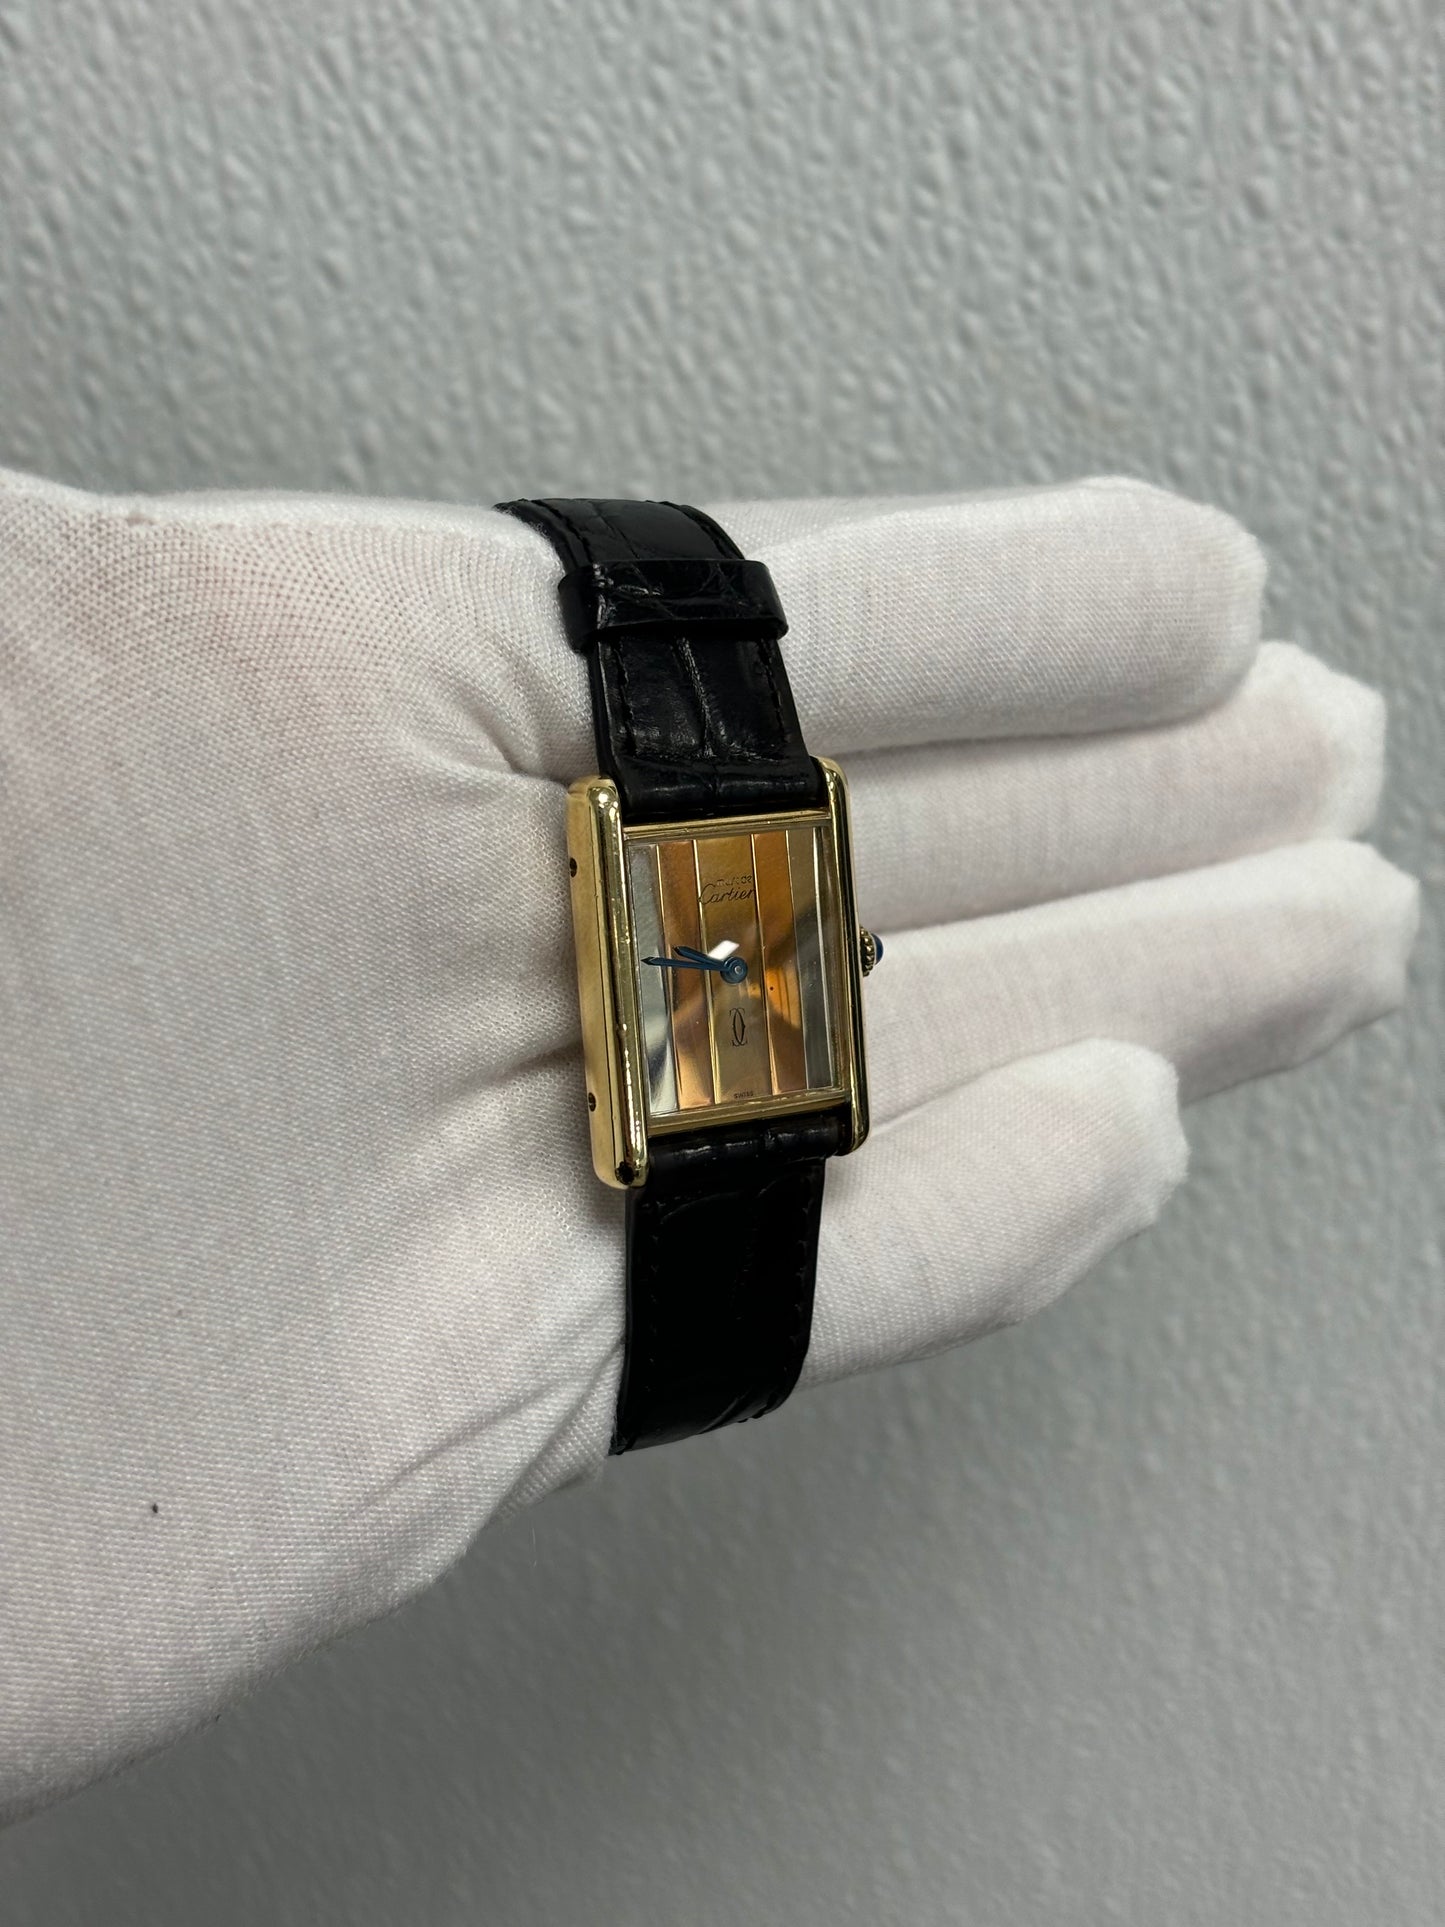 Cartier Tank De Must Yellow Gold Plated 23mm x 31mm Tri-Color Dial Watch - Happy Jewelers Fine Jewelry Lifetime Warranty